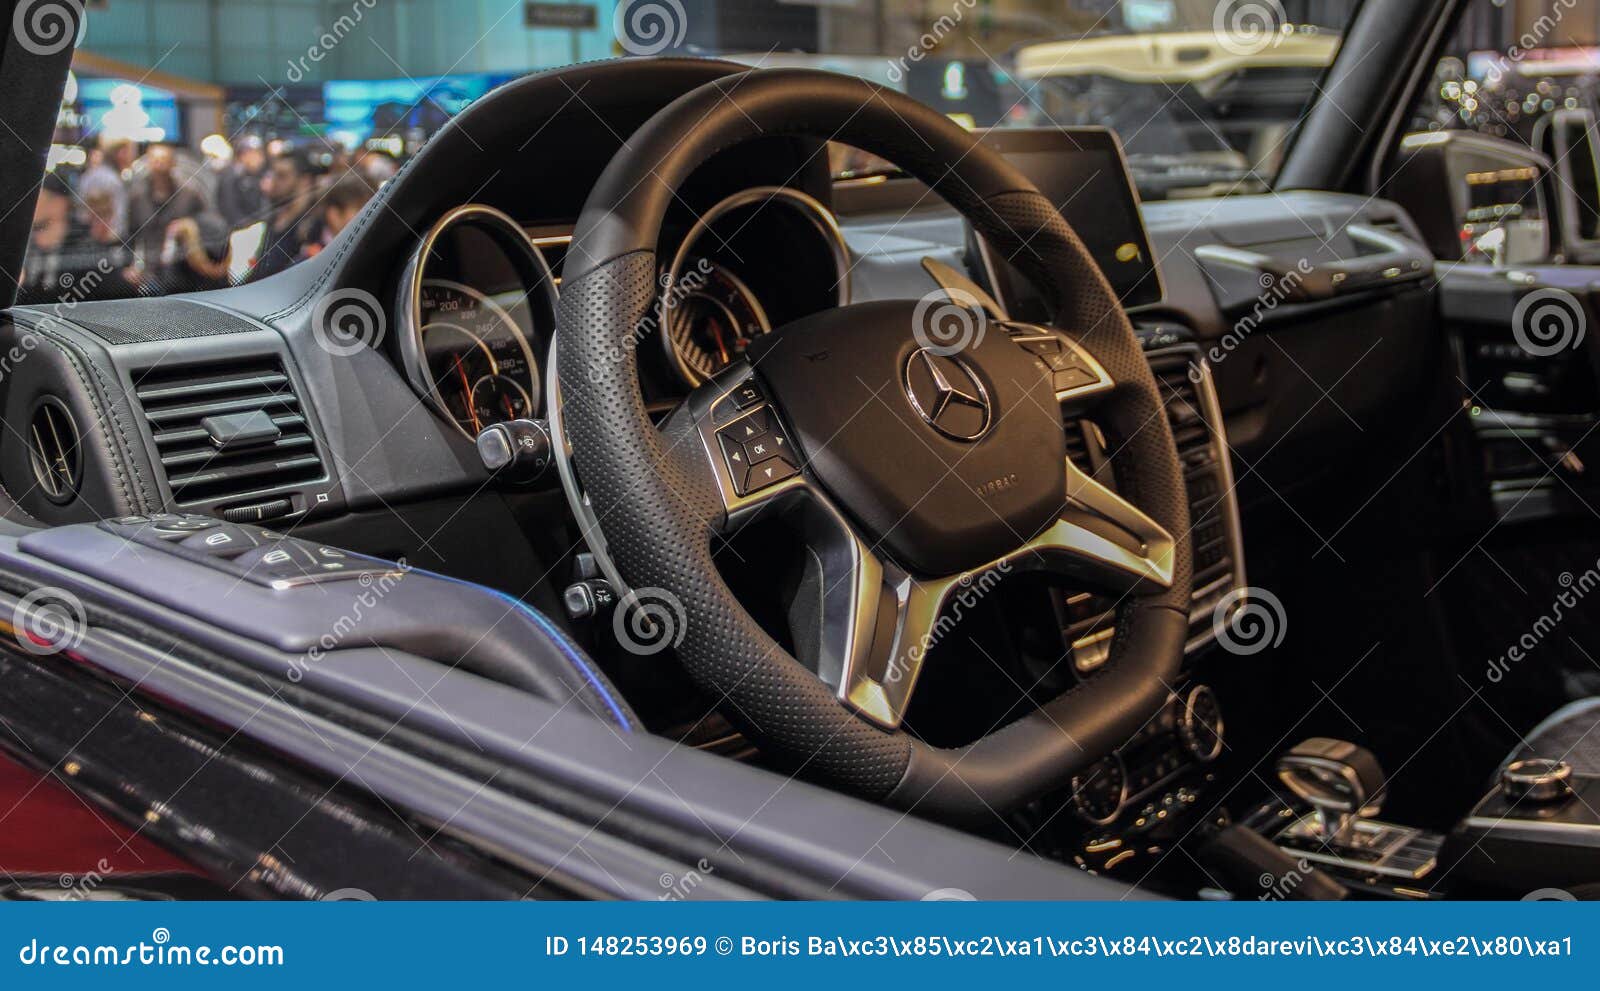 Switzerland Geneva March 9 19 Brabus 850 4x4 Mercedes Amg G 63 The th International Motor Show In Geneva From 7th To Editorial Stock Image Image Of Brand Exibition